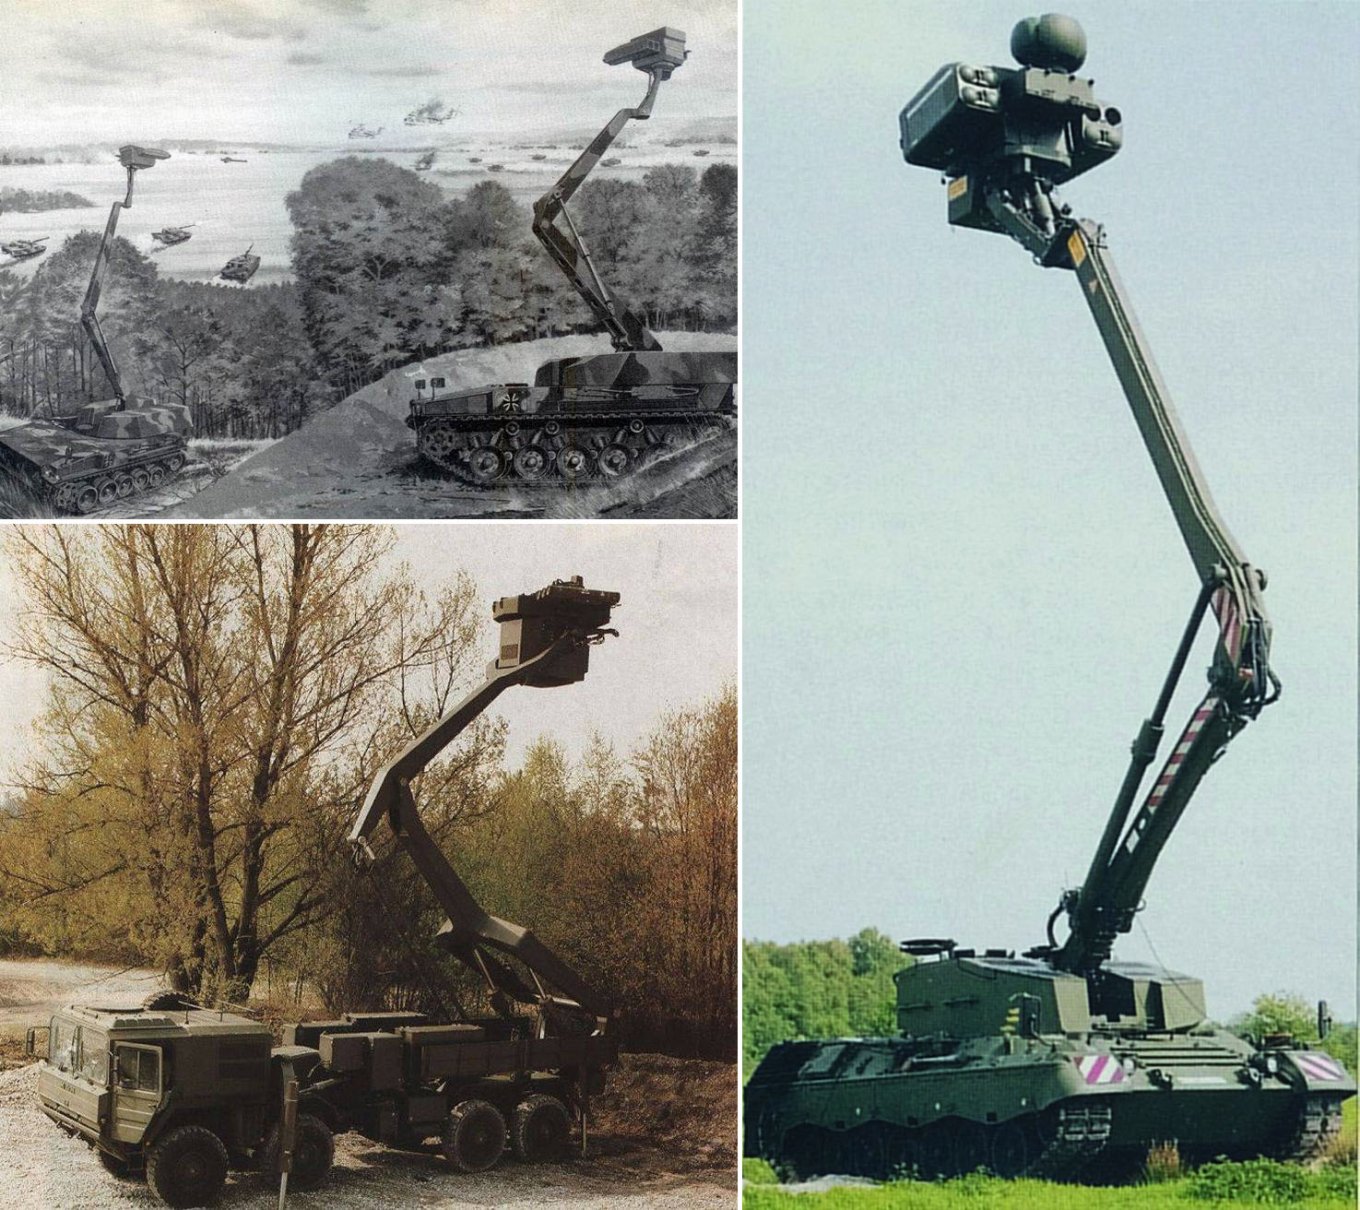 Examples of experiments with weaponized aerial lifts